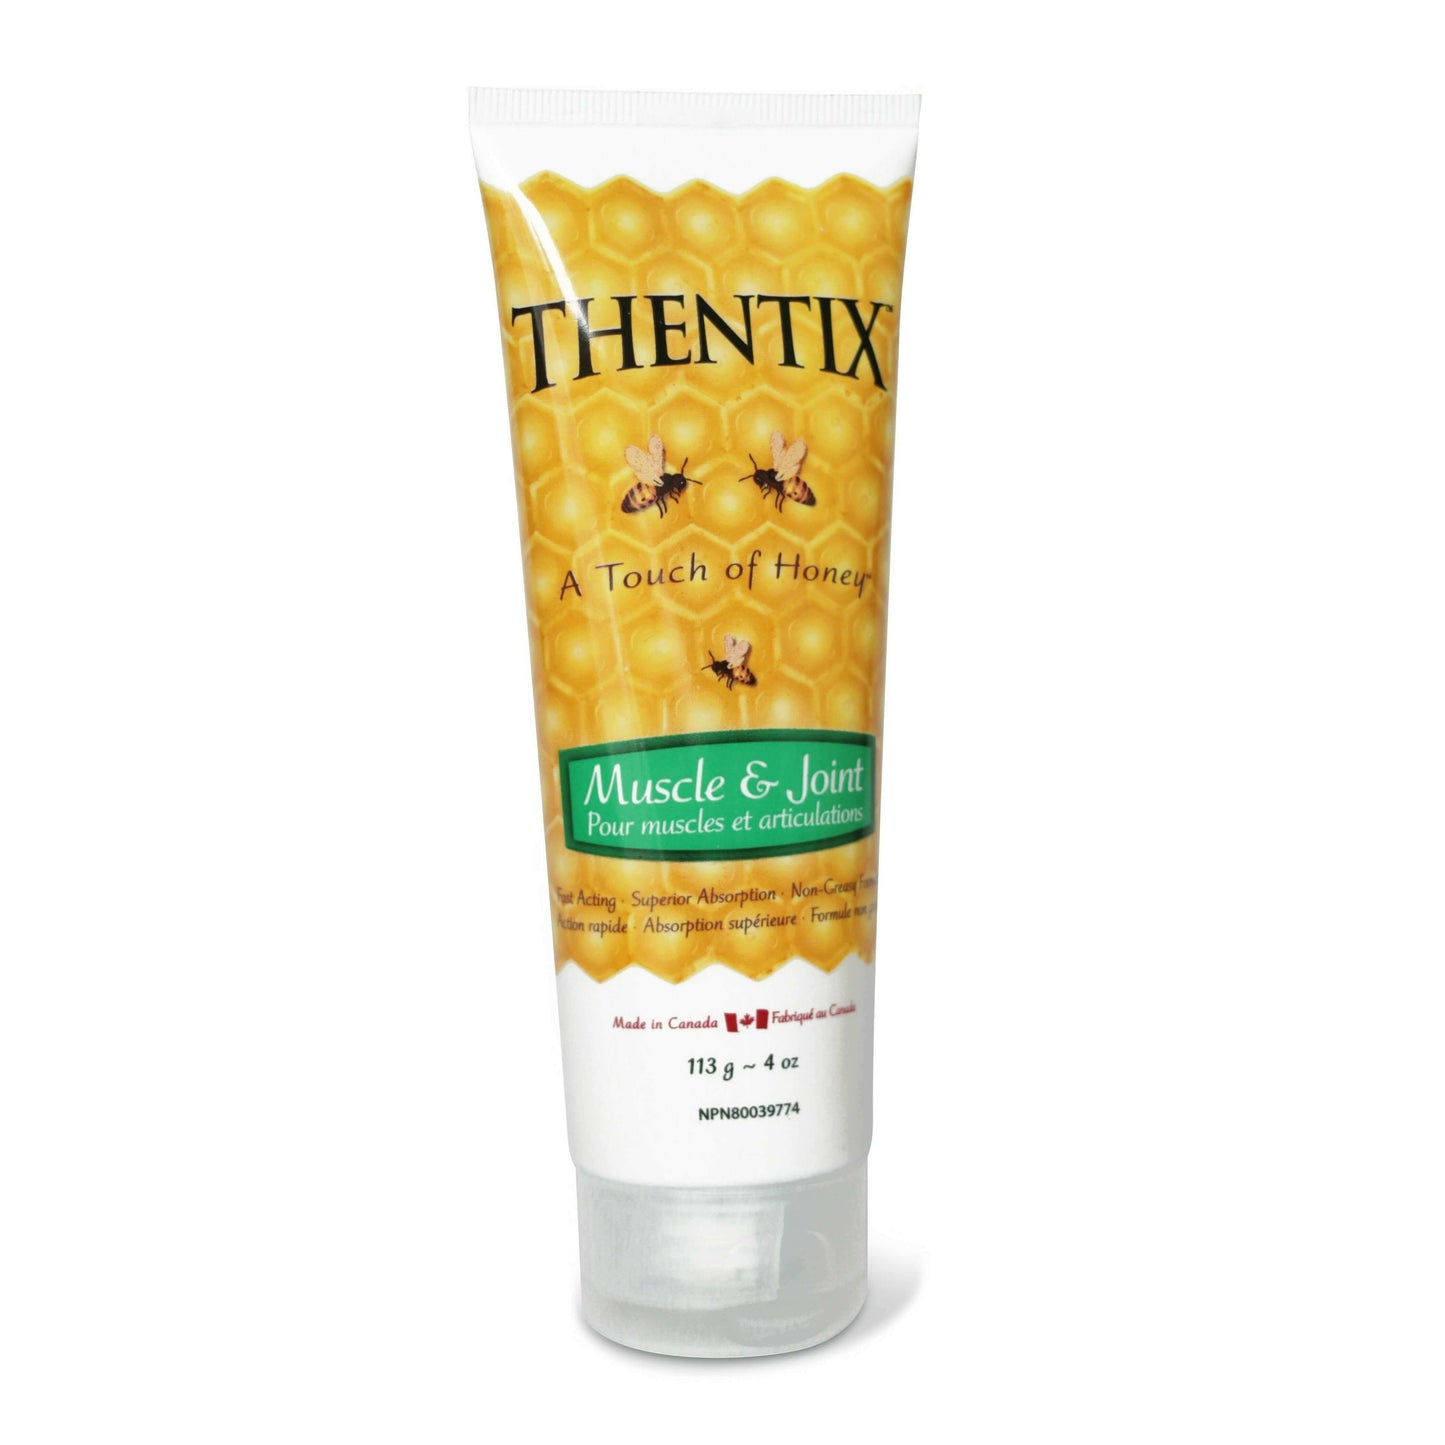 Thentix Muscle and Joint formula is an effective solution for those experiencing sore thigh muscles and sore leg muscles, as well as nerve relief.